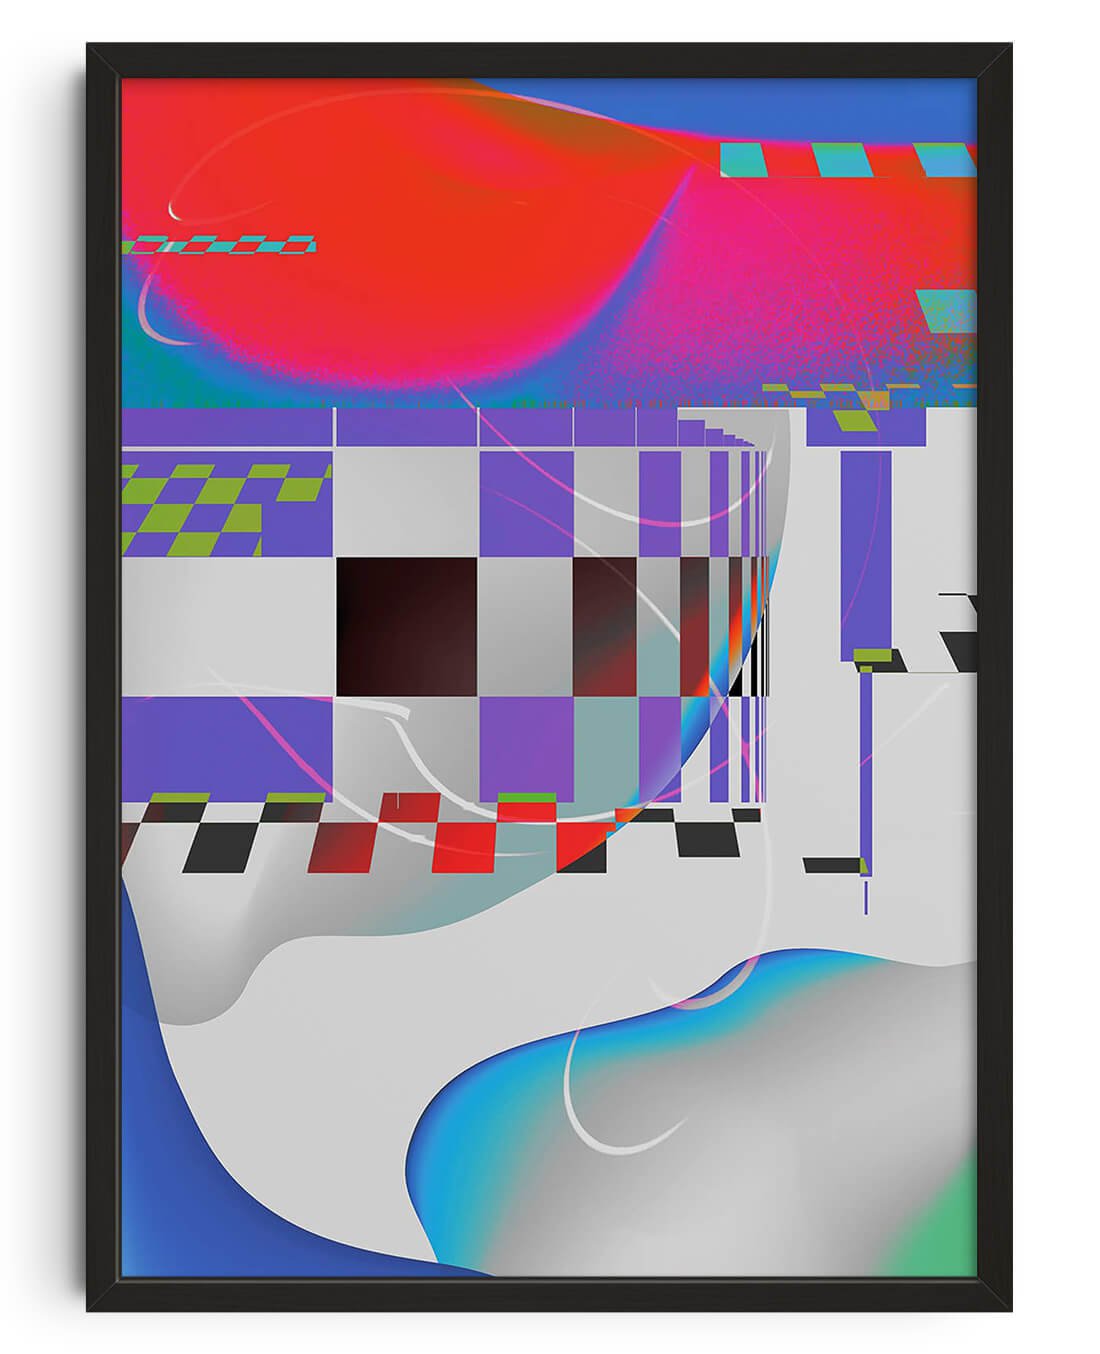 Virtual World contemporary wall art print by Roman Post. - sold by DROOL